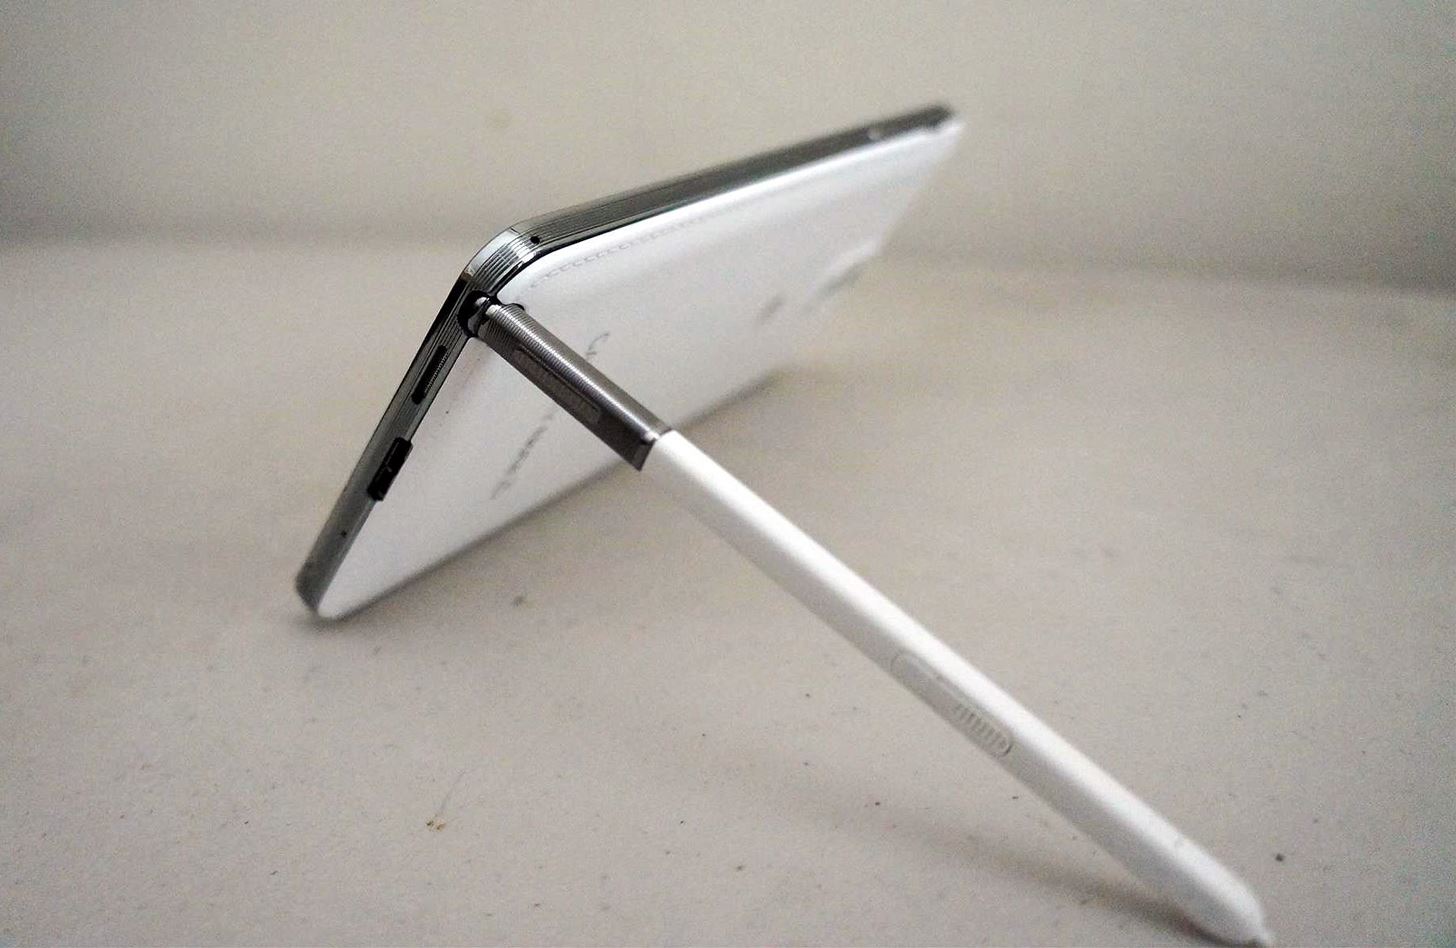 Attention: Your Galaxy Note 3's S Pen Works as a Built-in Kickstand